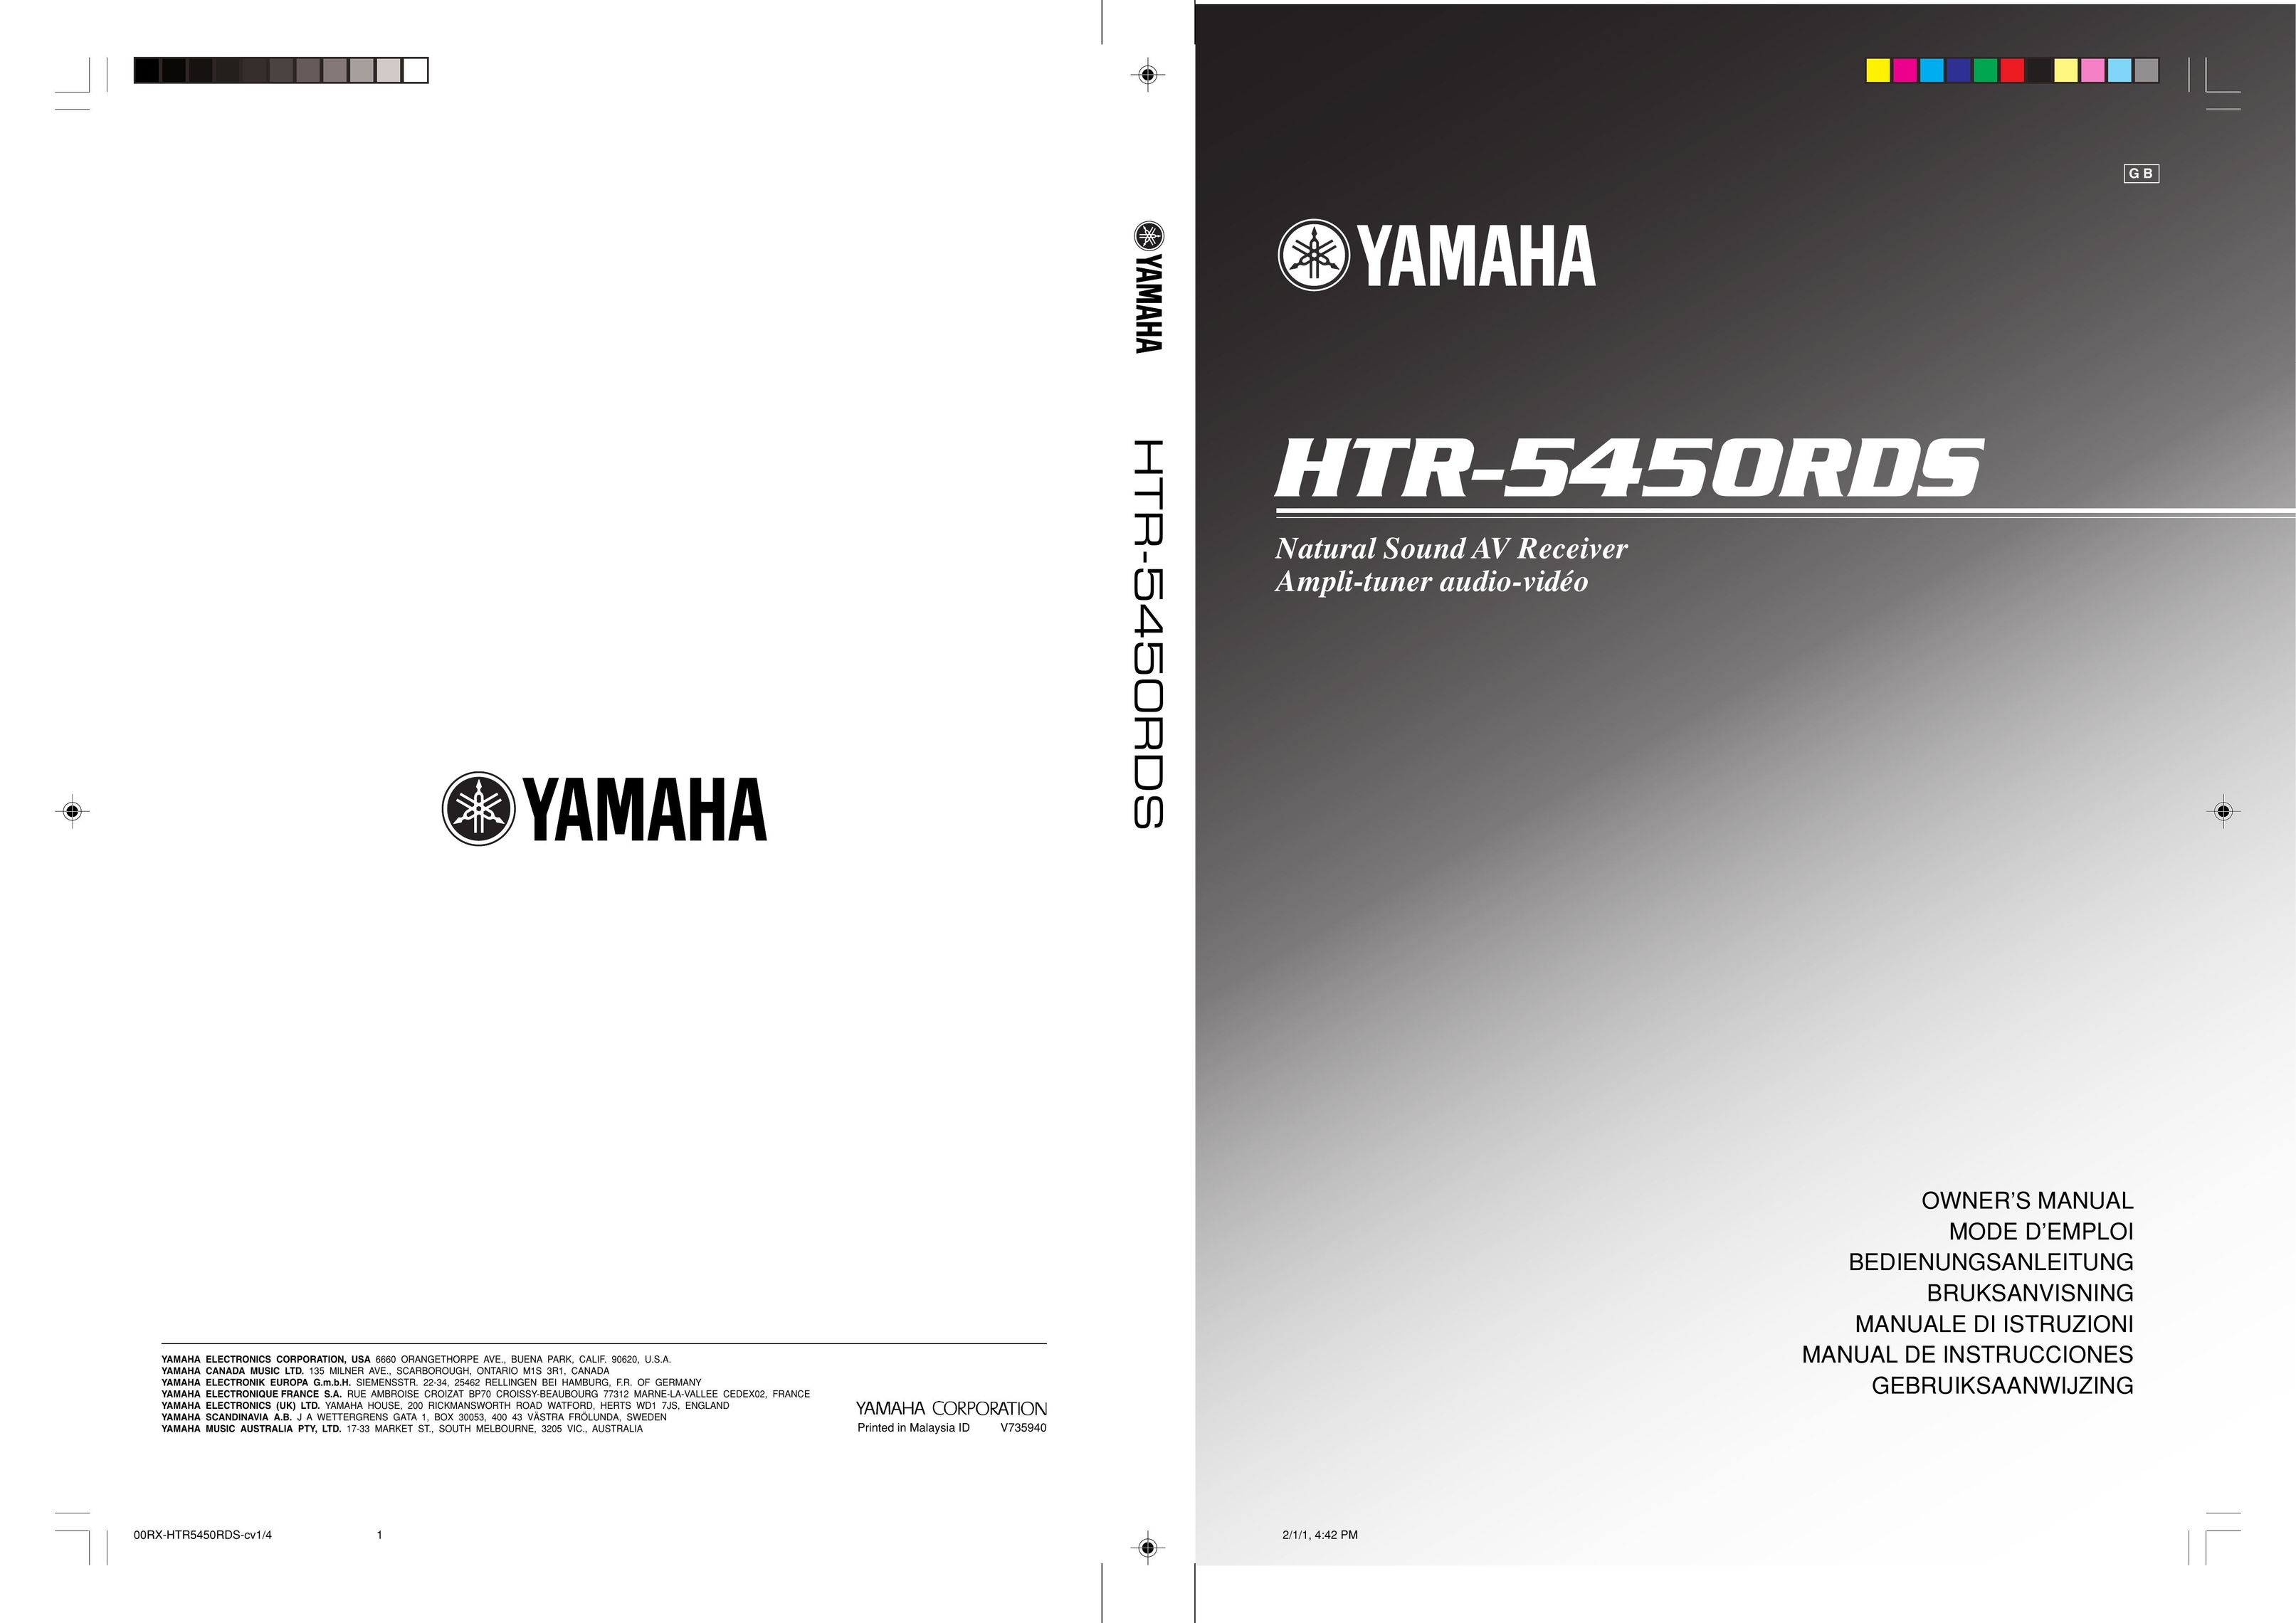 Yamaha HTR-5450RDS Stereo Receiver User Manual